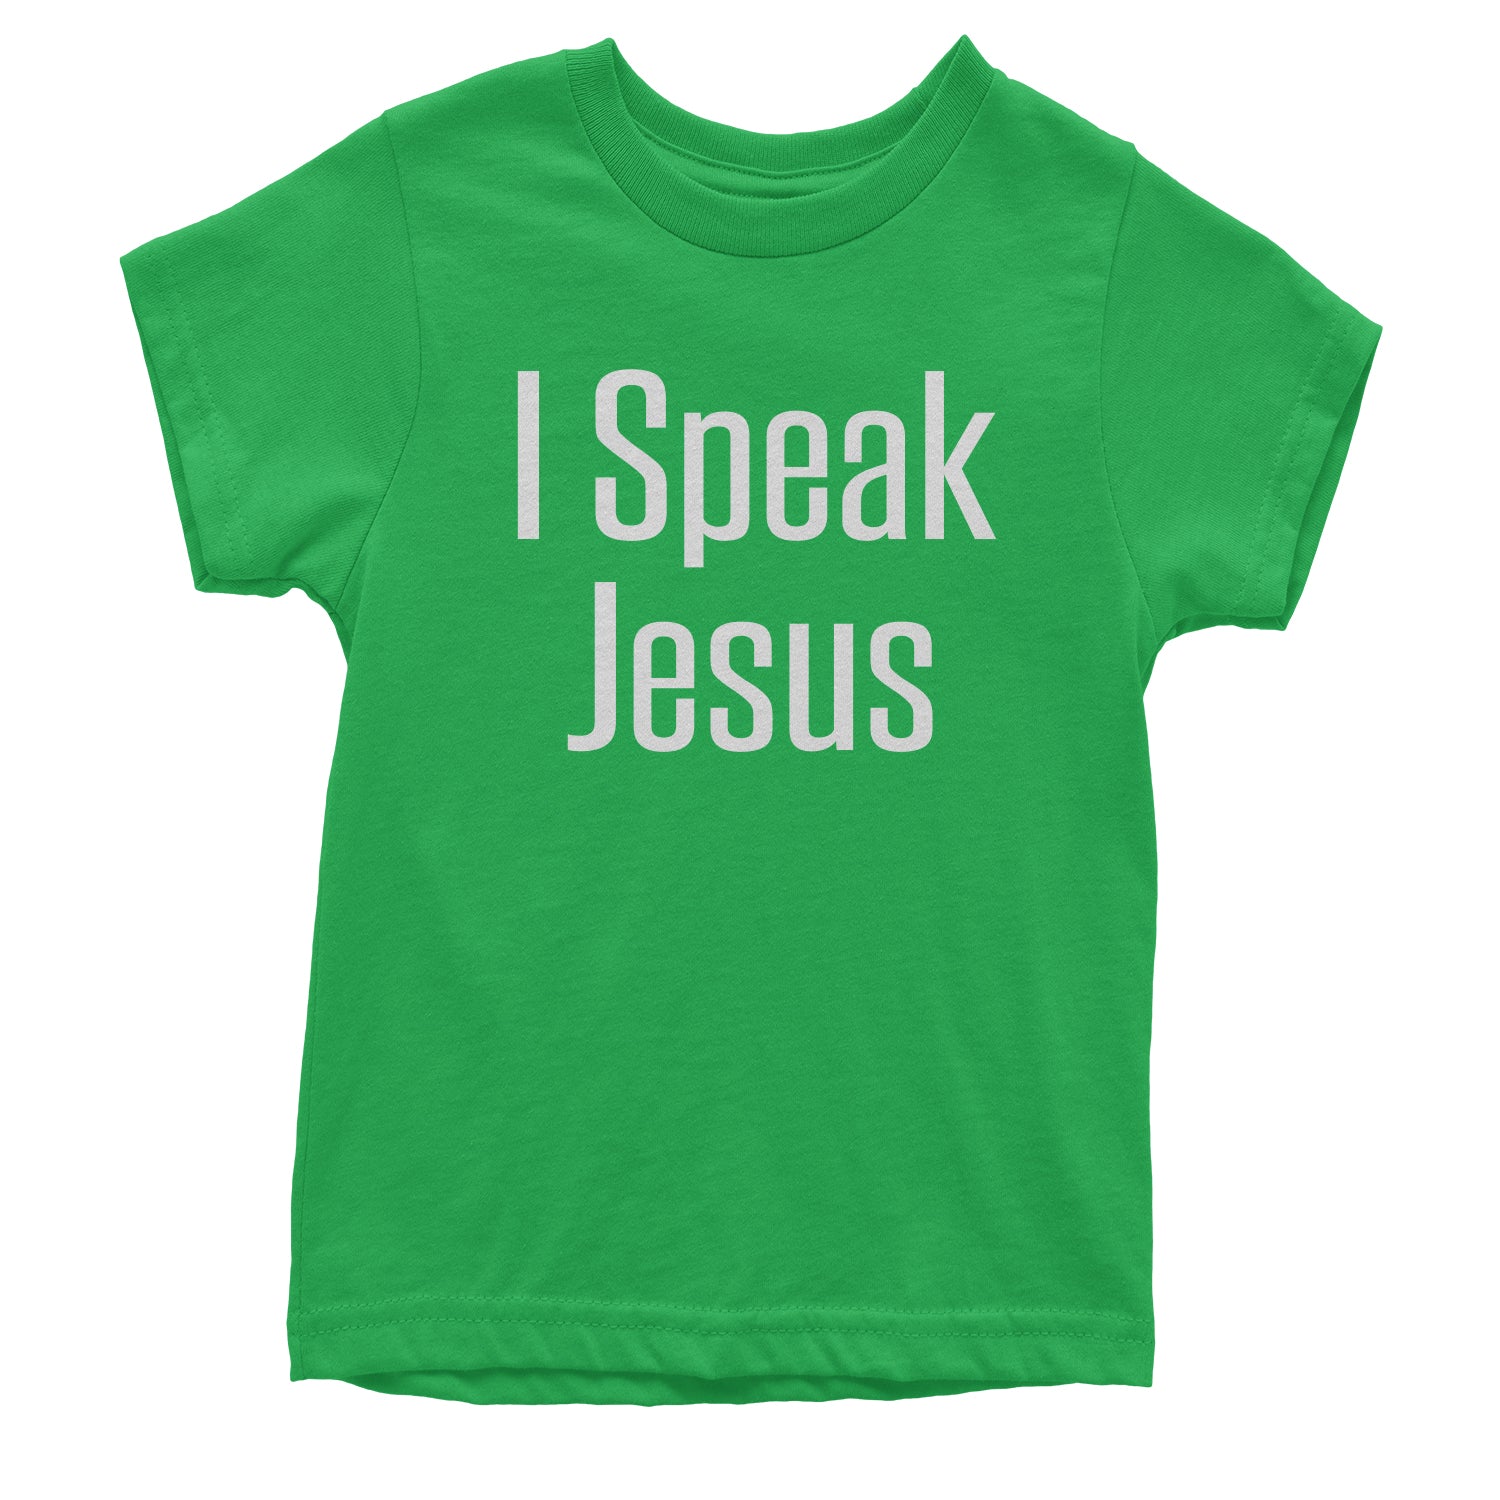 I Speak Jesus Youth T-shirt catholic, charity, christ, christian, christianity, city, concert, gayle, heaven, in, maverick, only, praise, scars, worship by Expression Tees